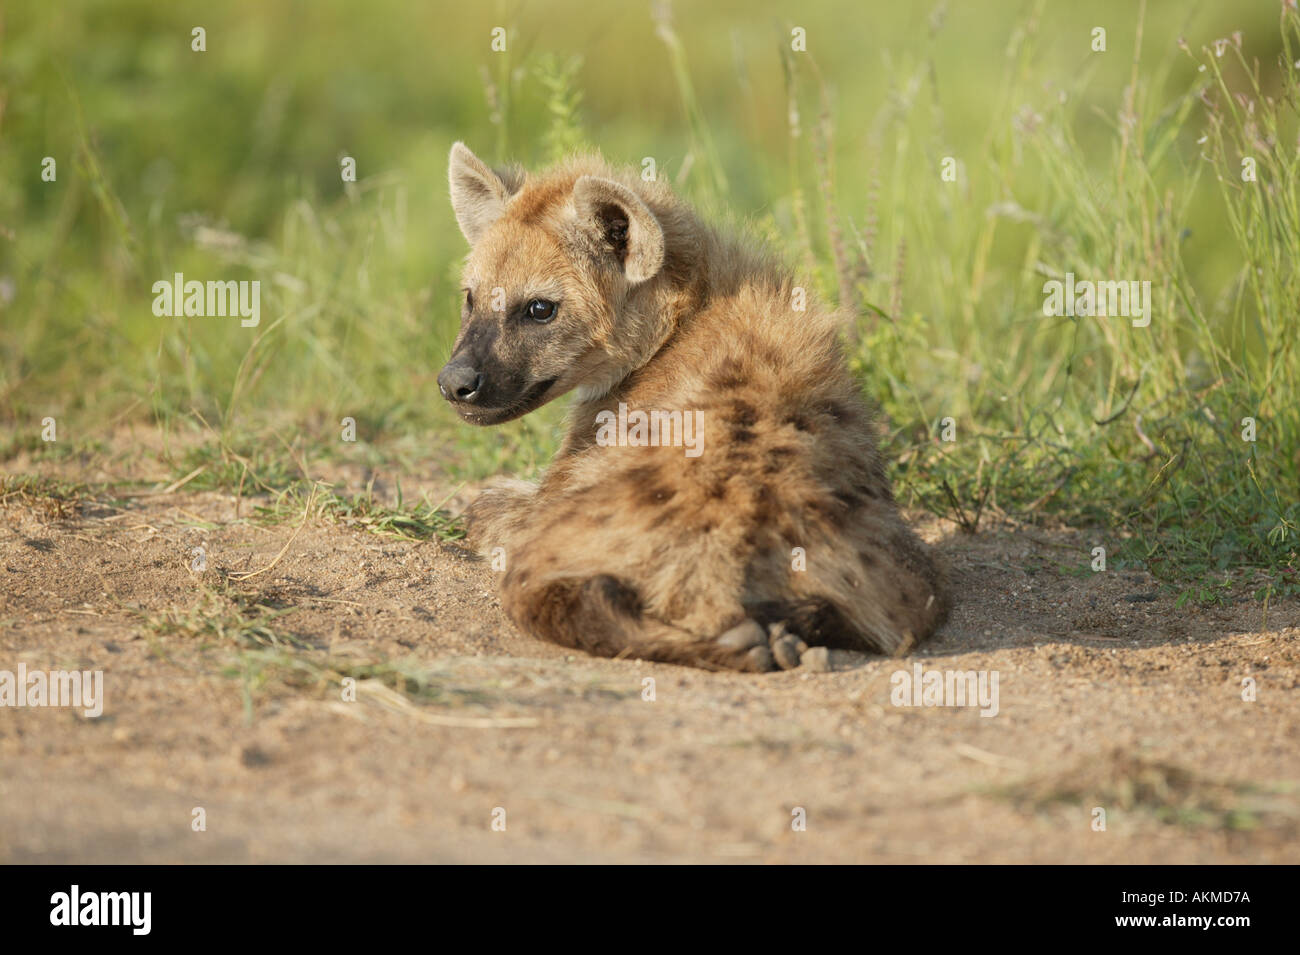 young hyena sitting on the ground Stock Photo